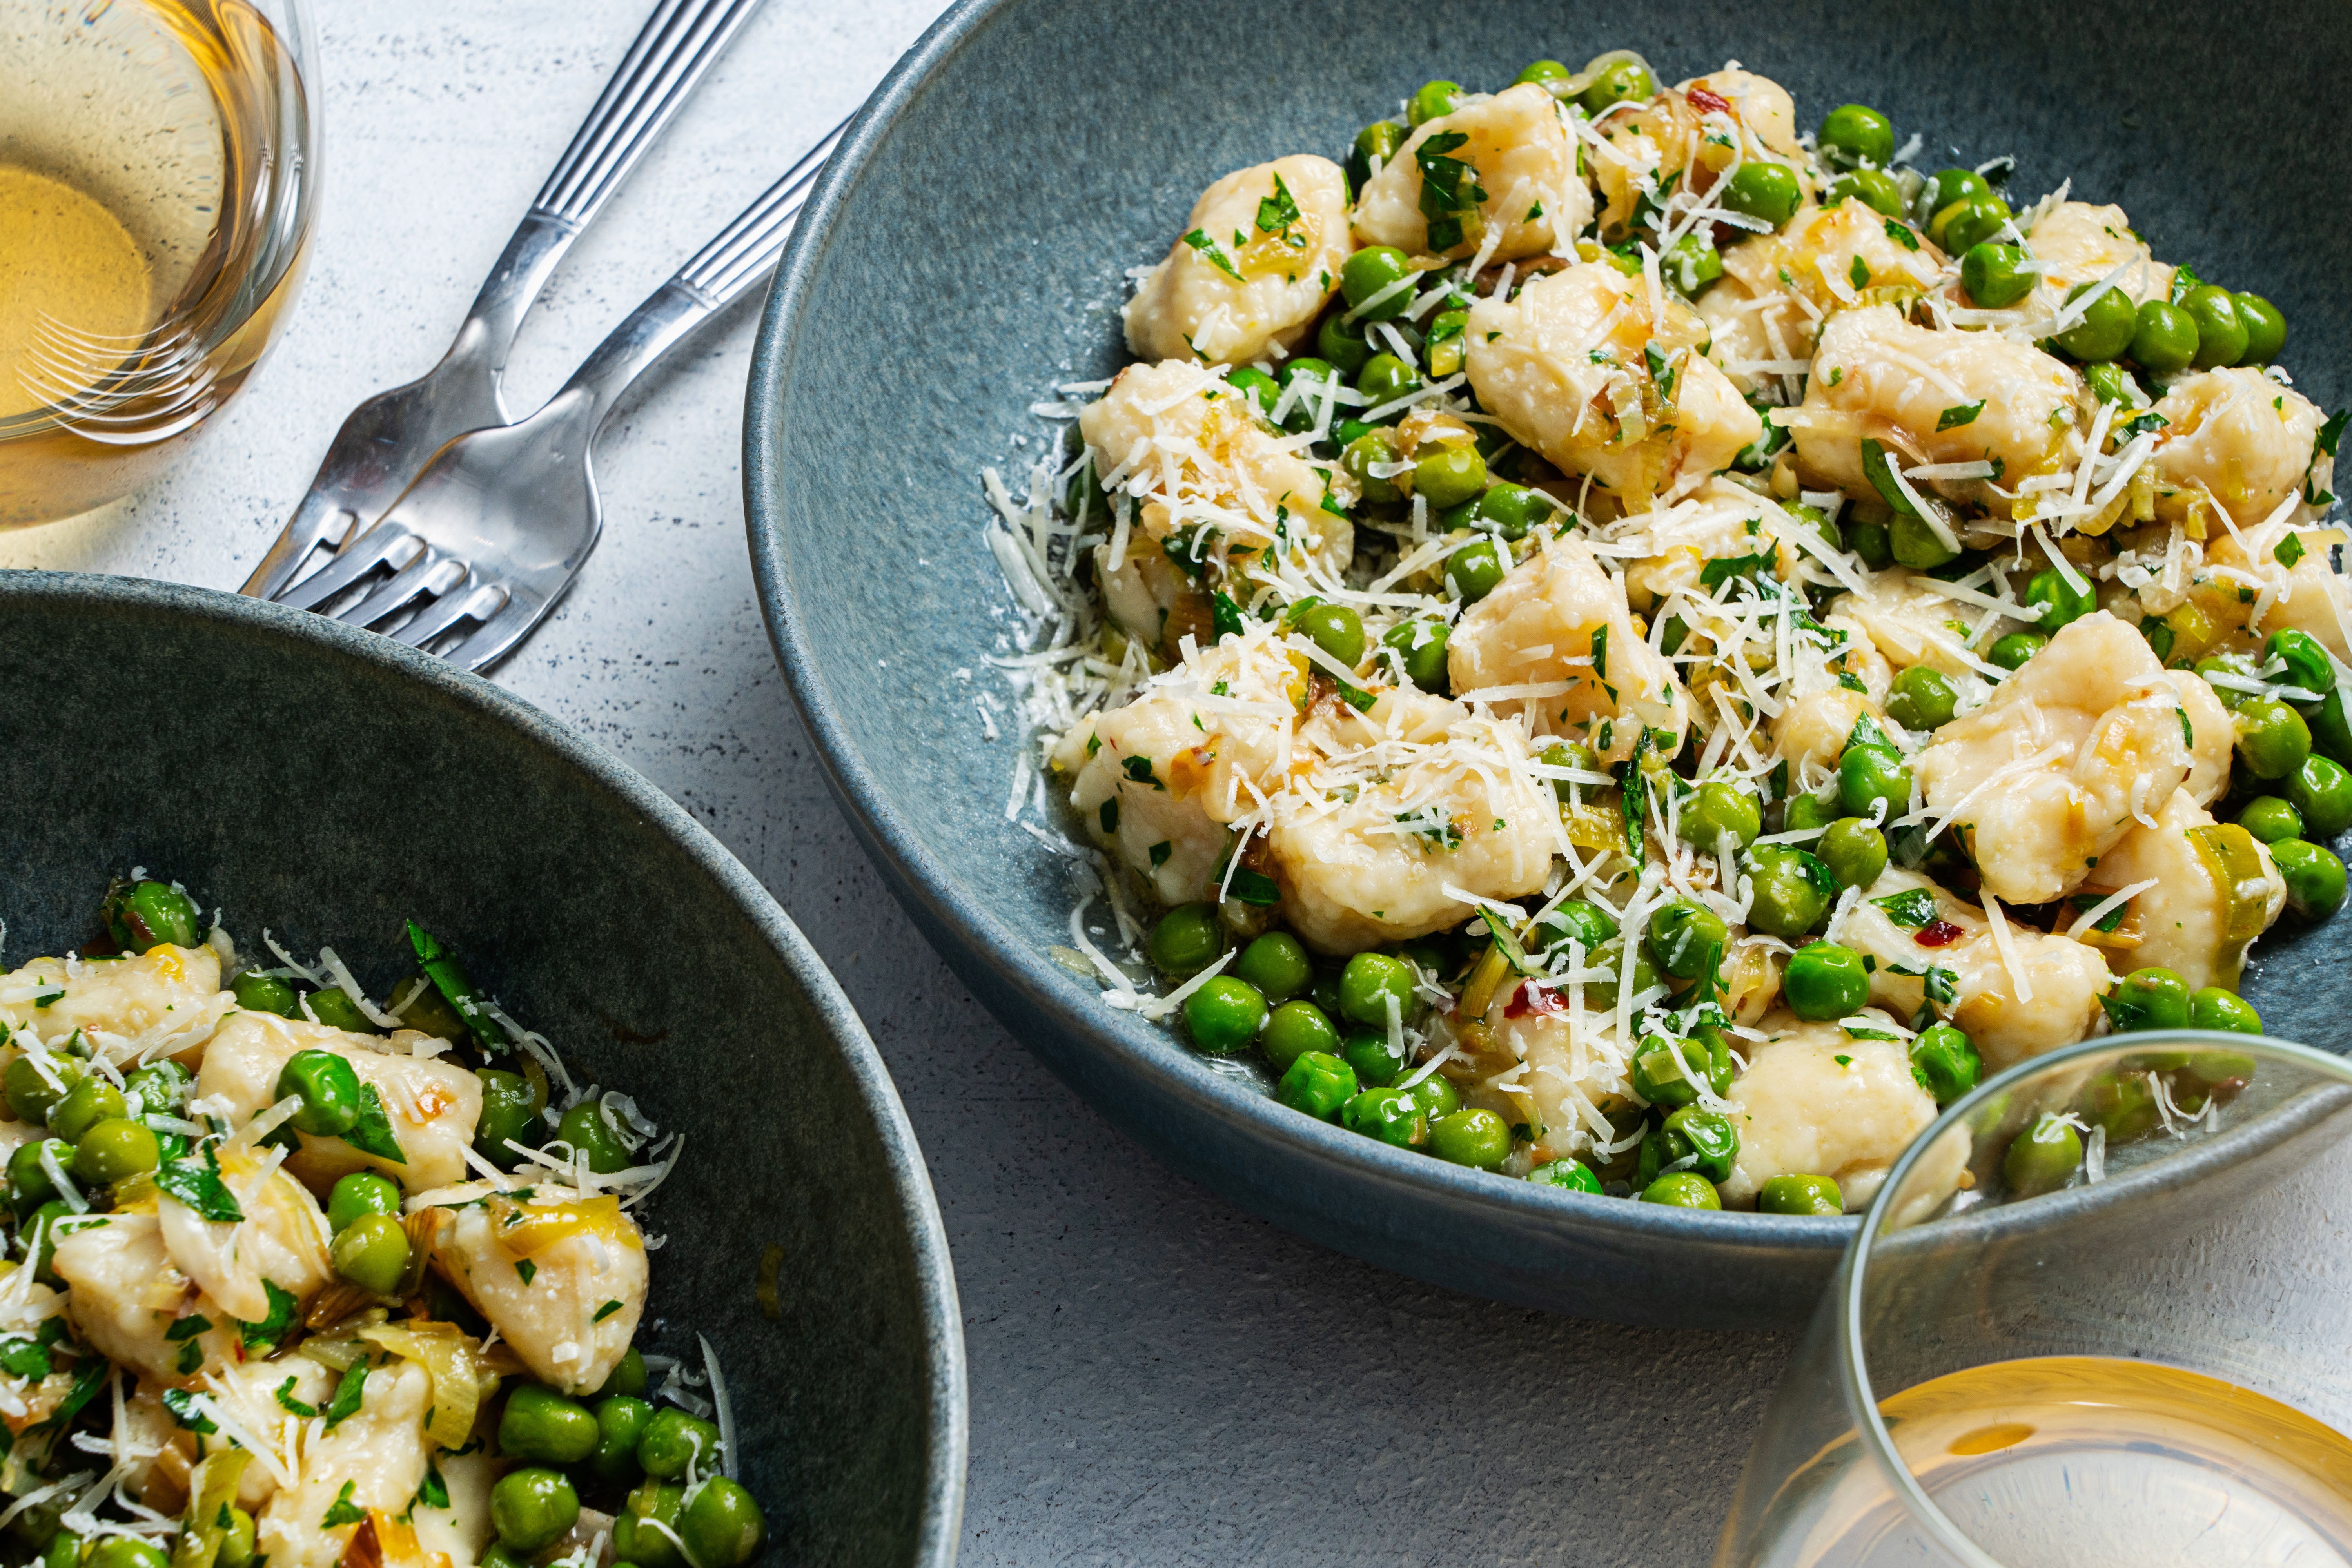 These gnocchi are made with ricotta instead of potatoes, and stuffed with lemon zest for a burst of flavour